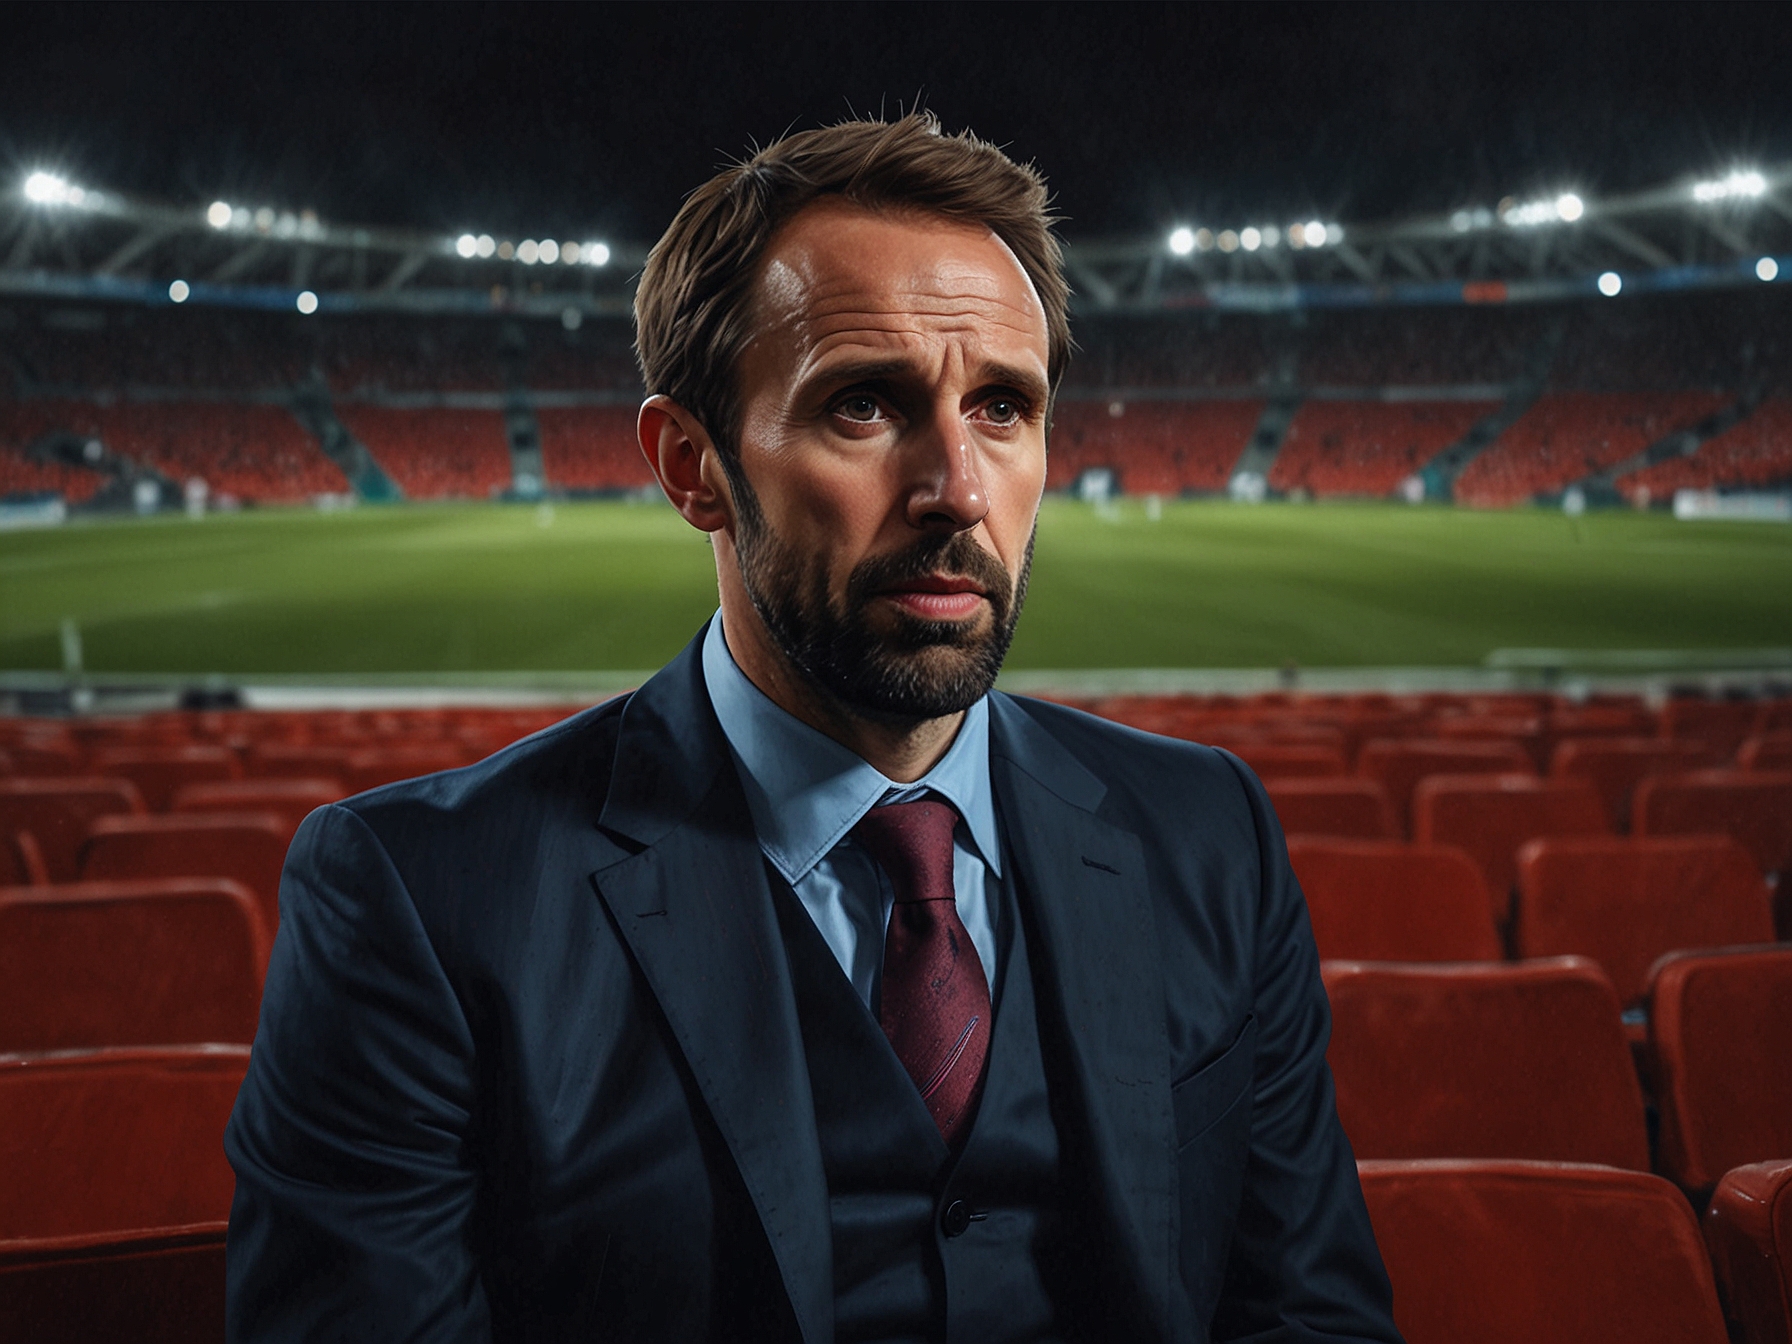 Gareth Southgate in a post-match interview with a somber expression, reflecting on England's disappointing performance at Euro 2024 amid a backdrop of empty stadium seats.